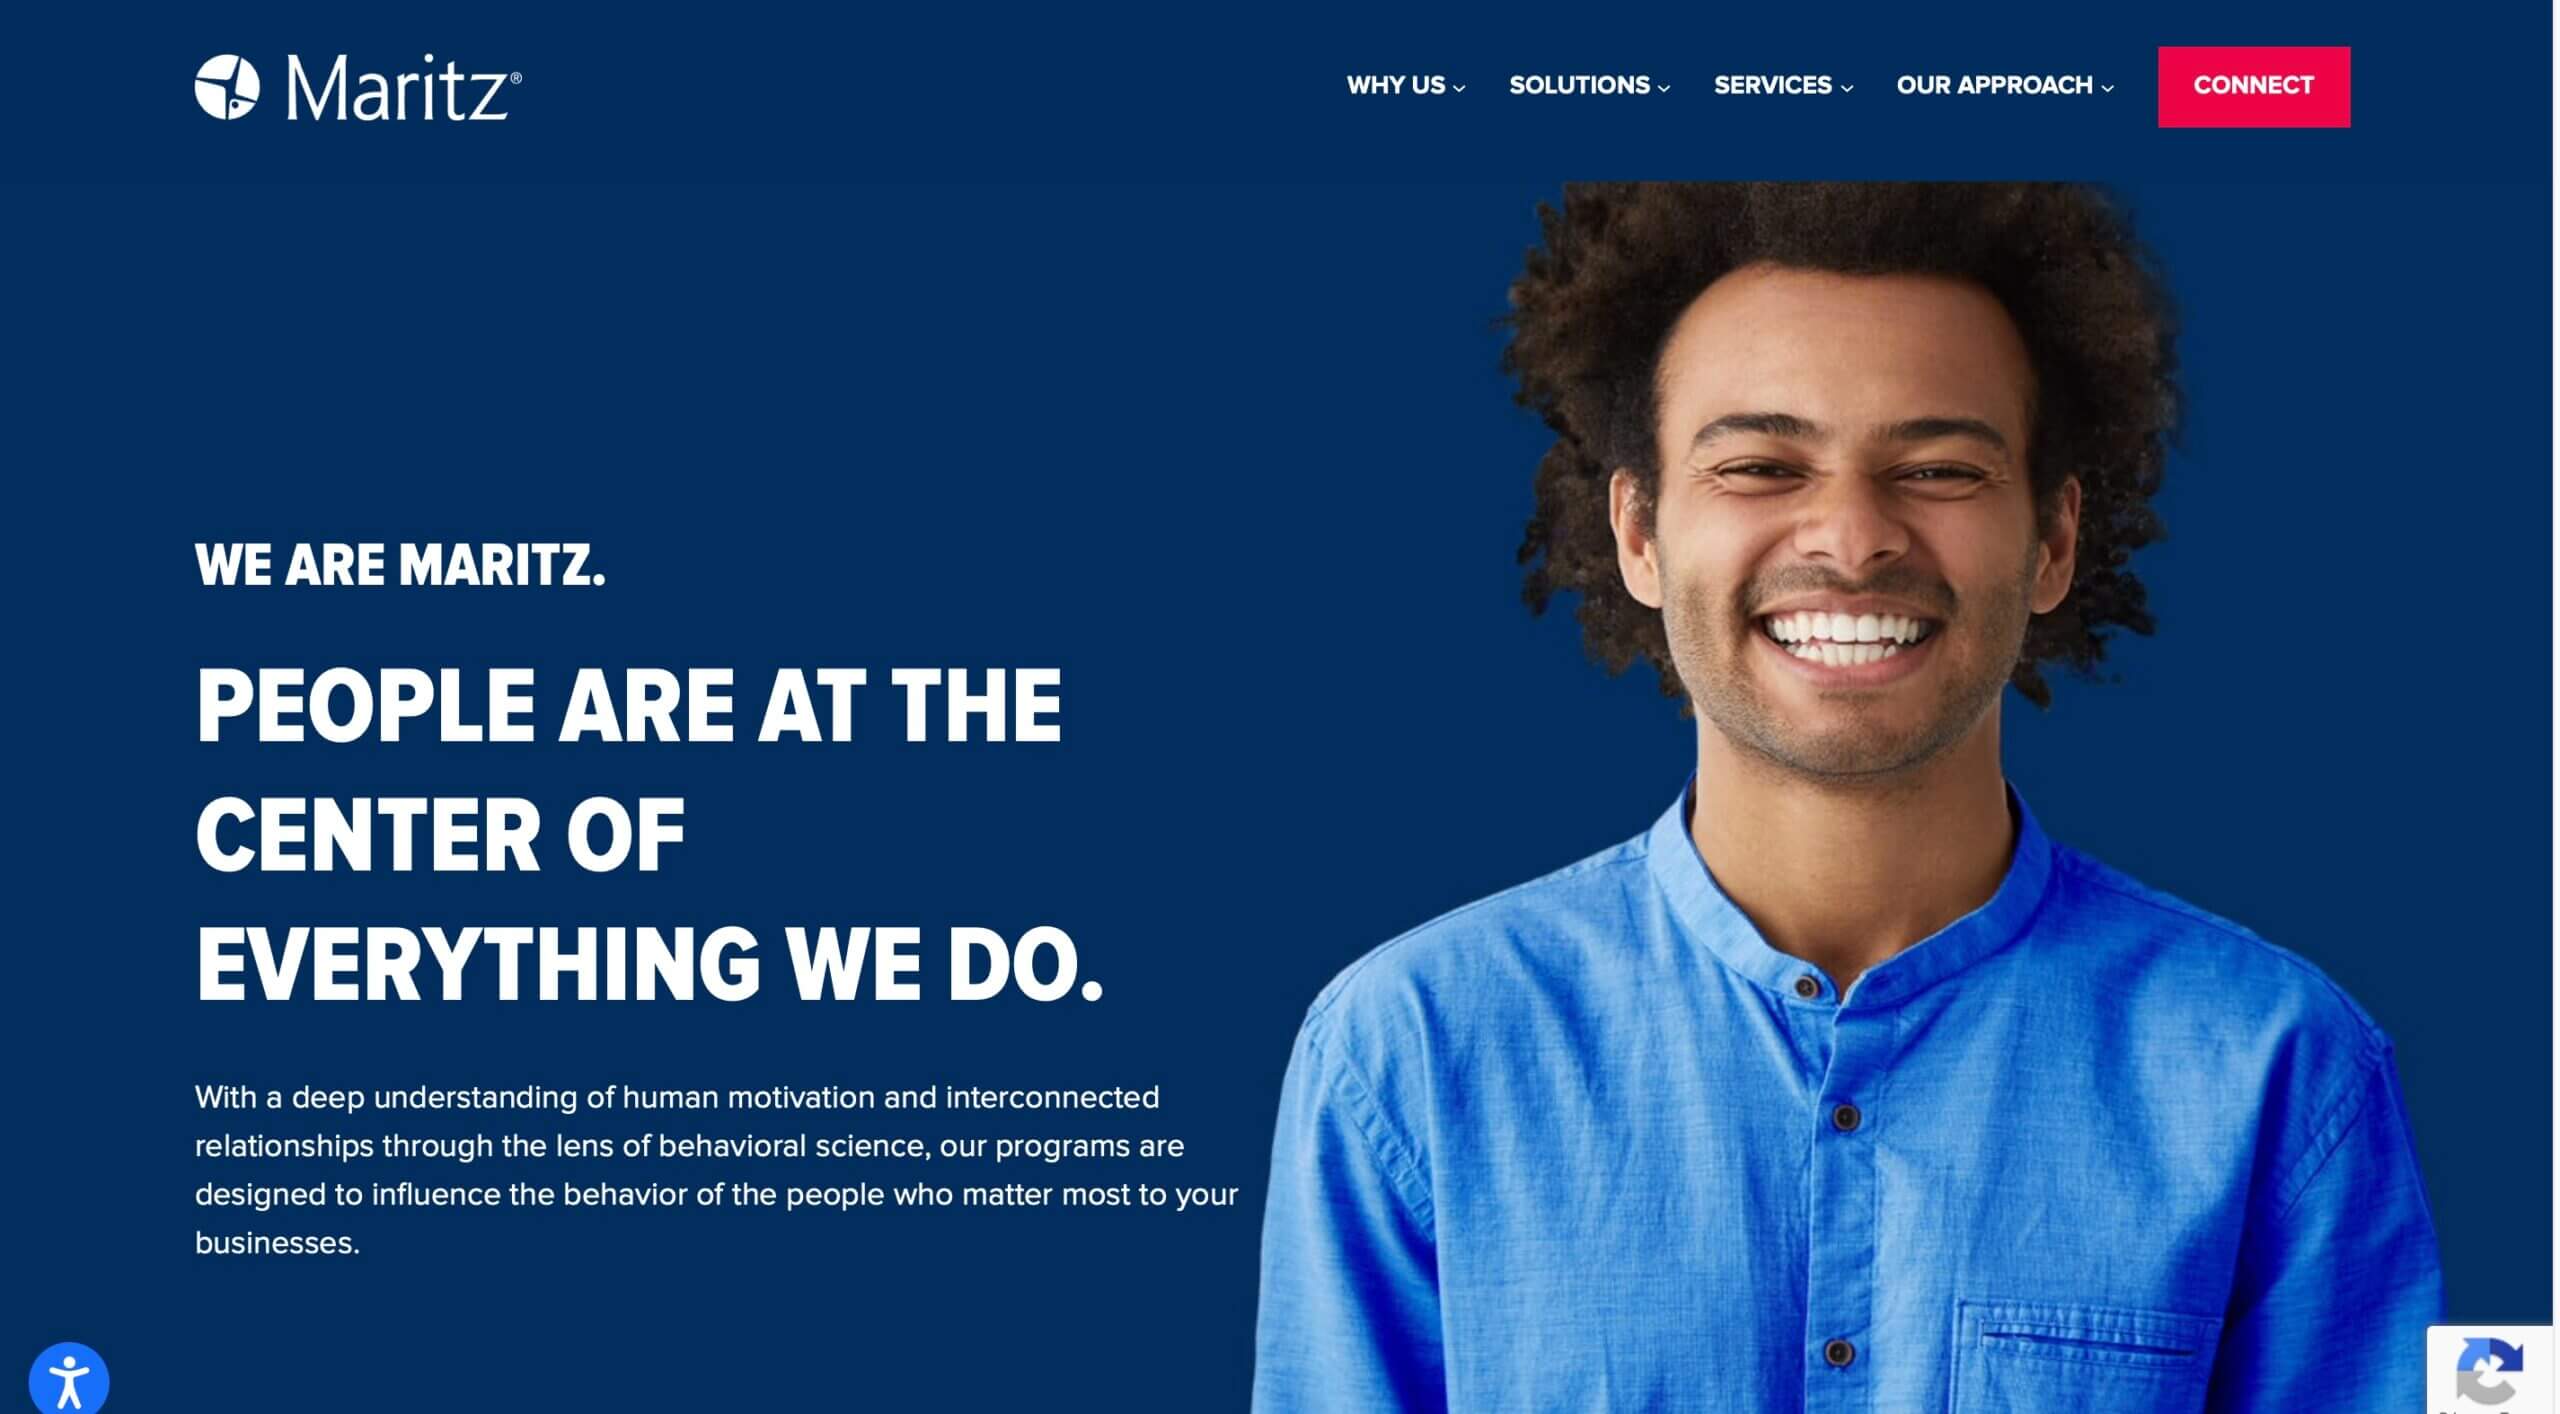 A person with curly hair smiling in a blue shirt, on a website page stating "PEOPLE ARE AT THE CENTER OF EVERYTHING WE DO" for Maritz.